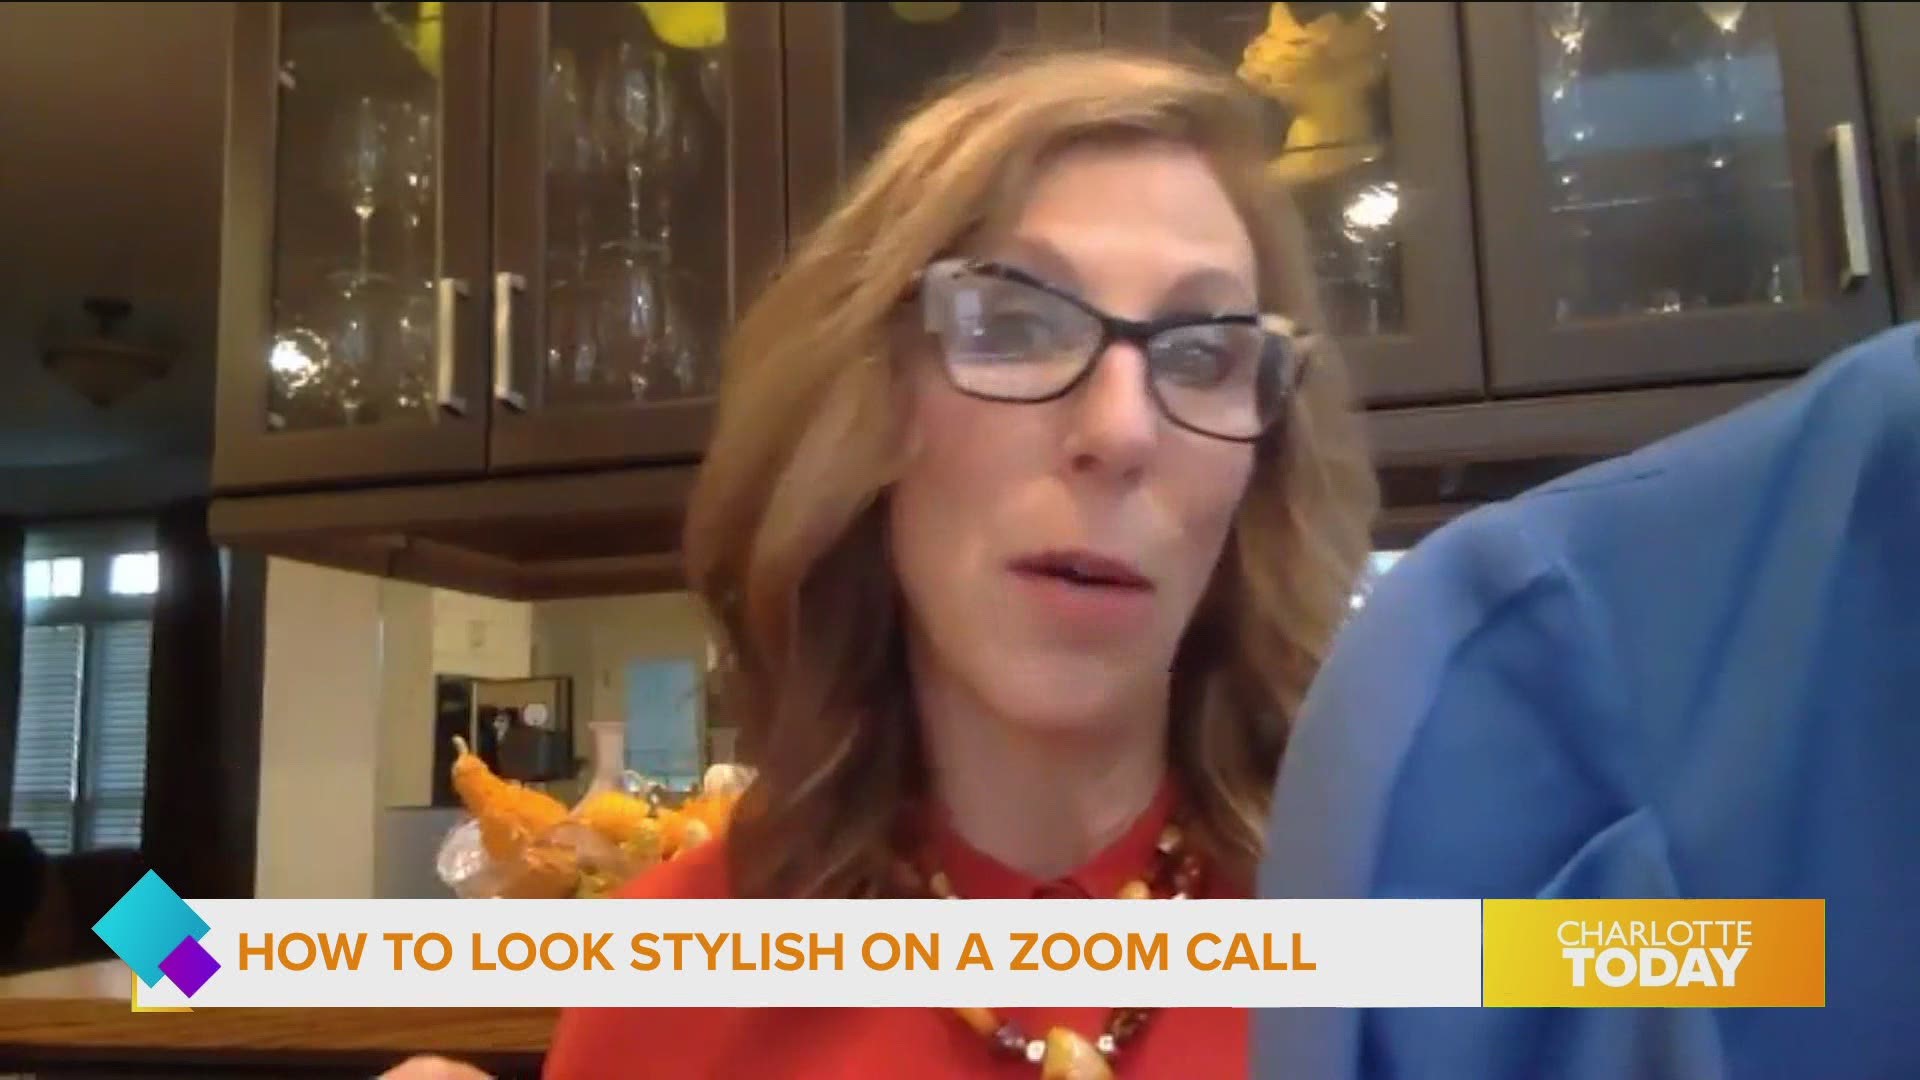 Suzanne Libfraind explains why you should care about the way you look in your next video call